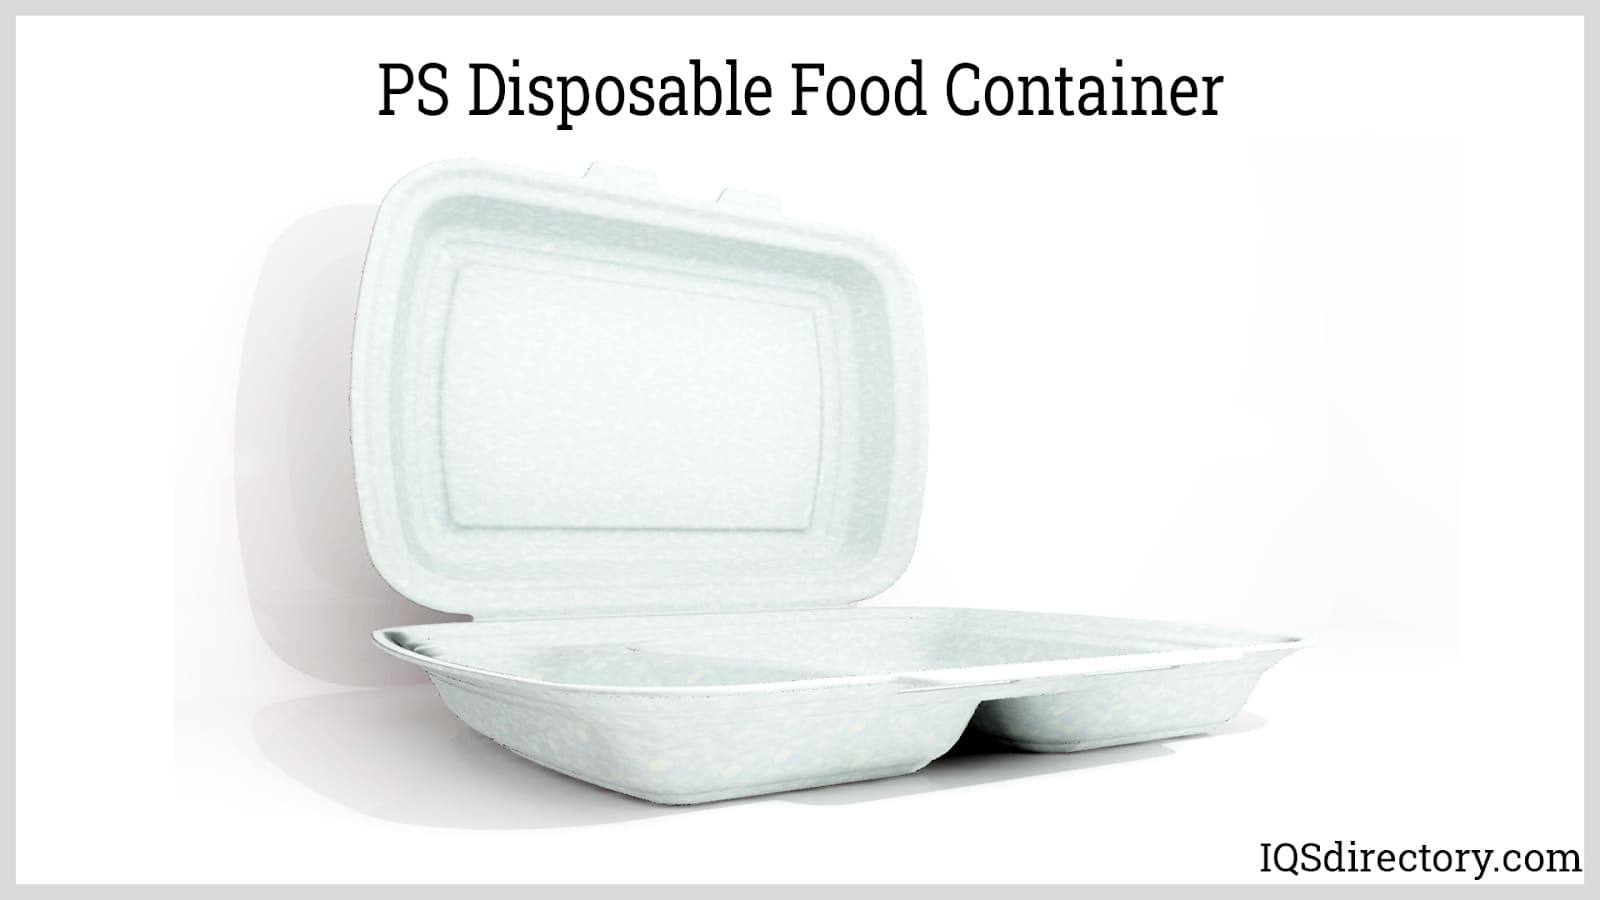 PS Disposable Food Container